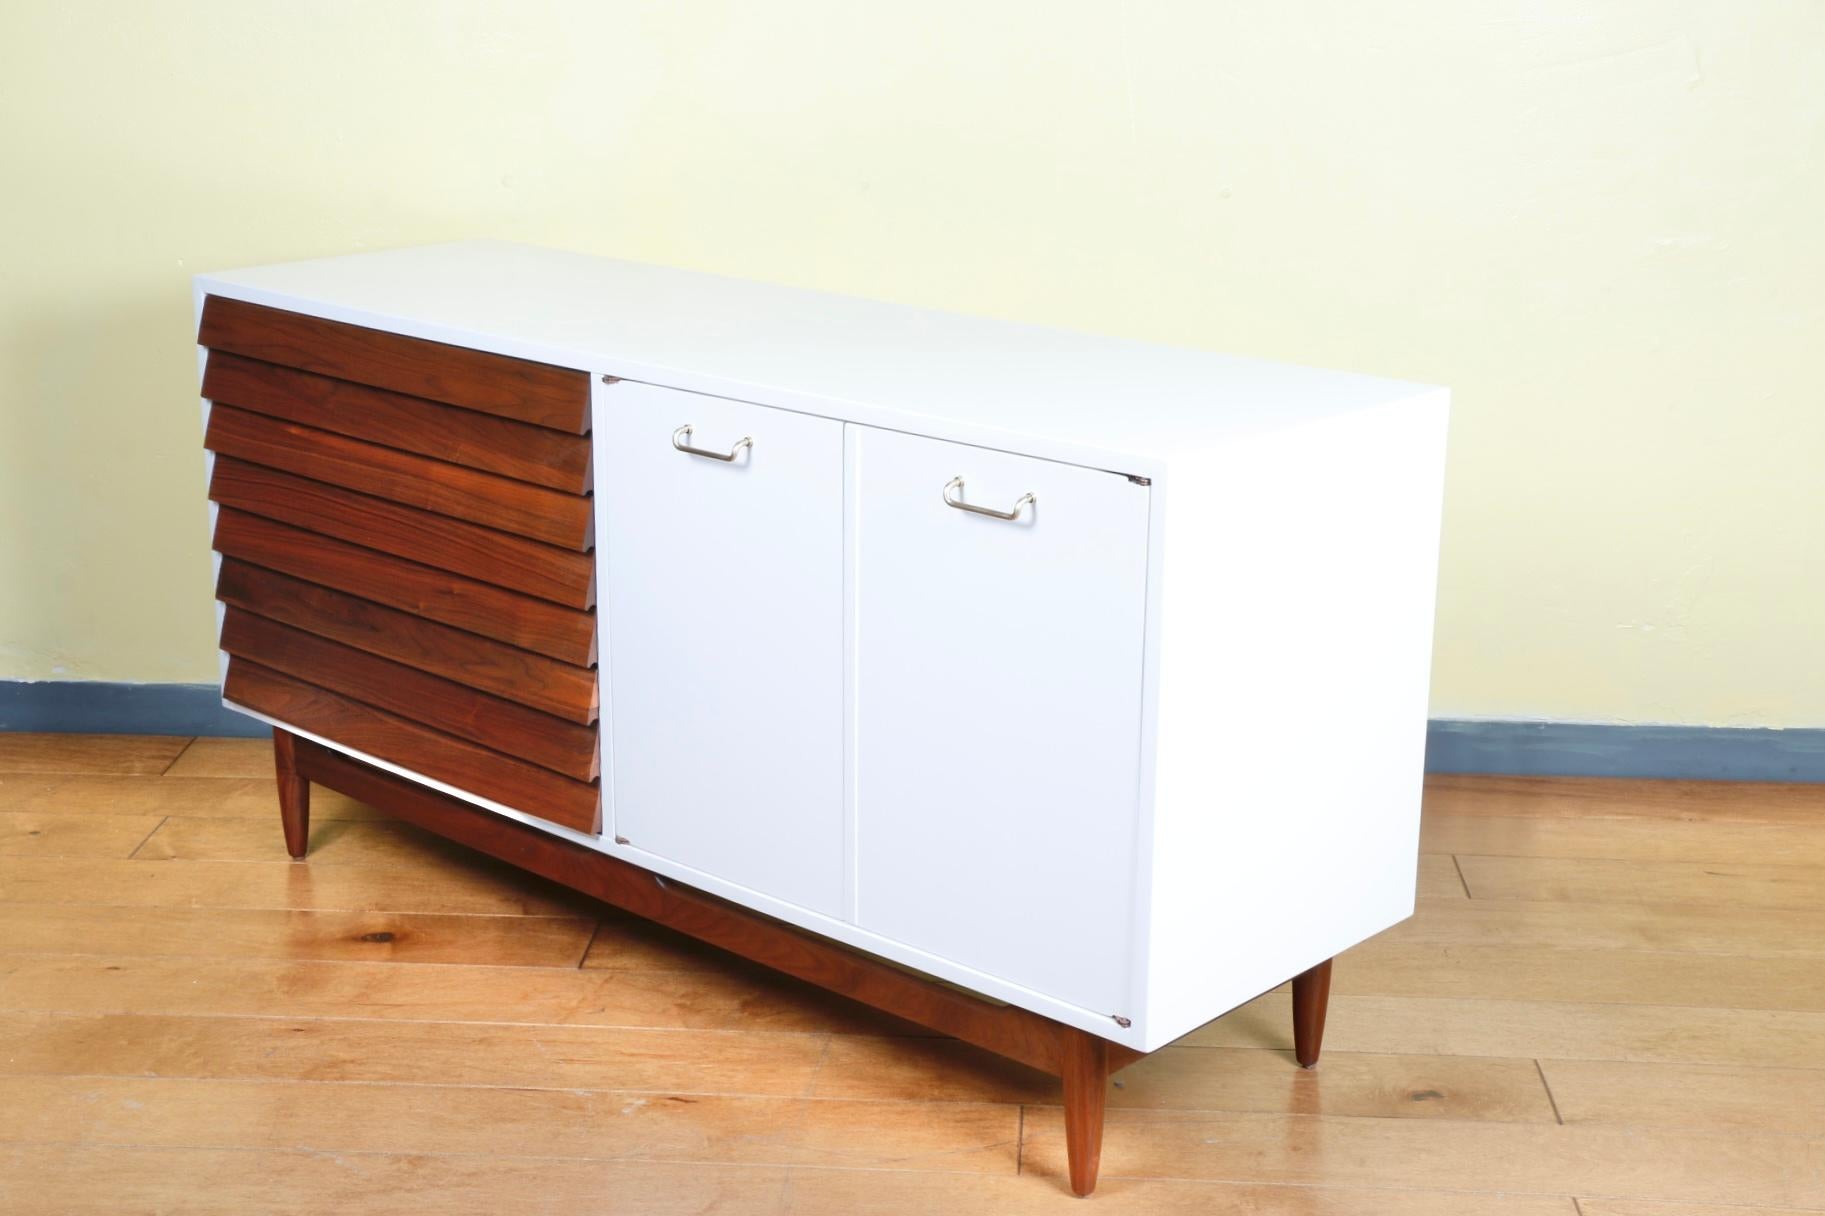 Gorgeous refinished walnut credenza painted white with walnut accent wood left side drawers. Great design and style with brass handles. Are drawers and doors work well. Base is sturdy and strong.